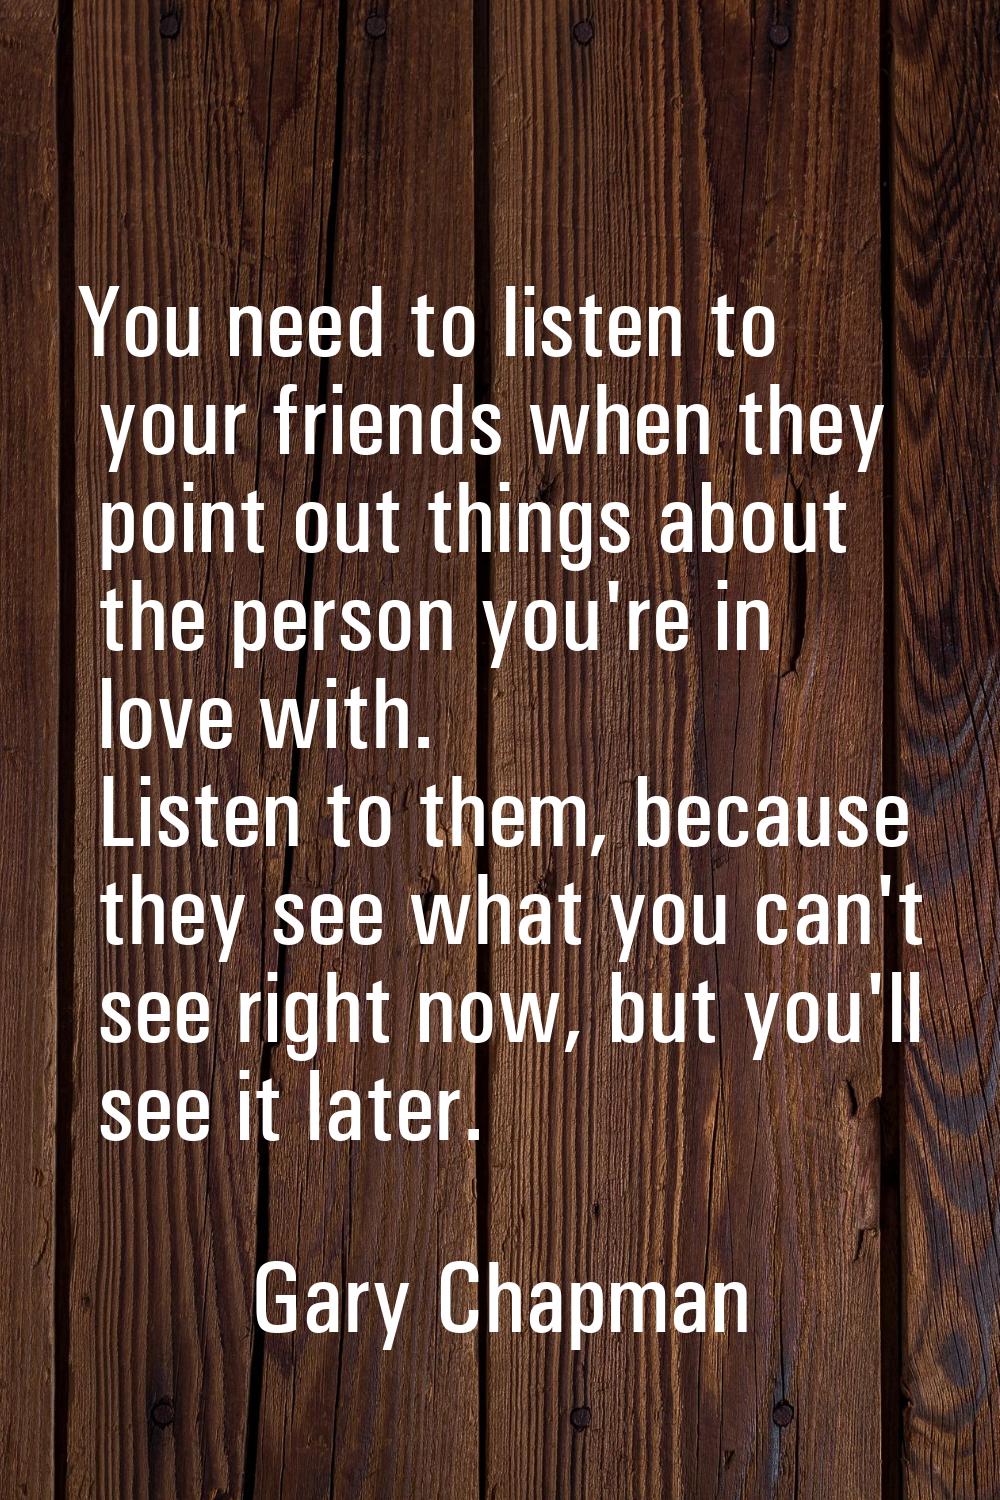 You need to listen to your friends when they point out things about the person you're in love with.